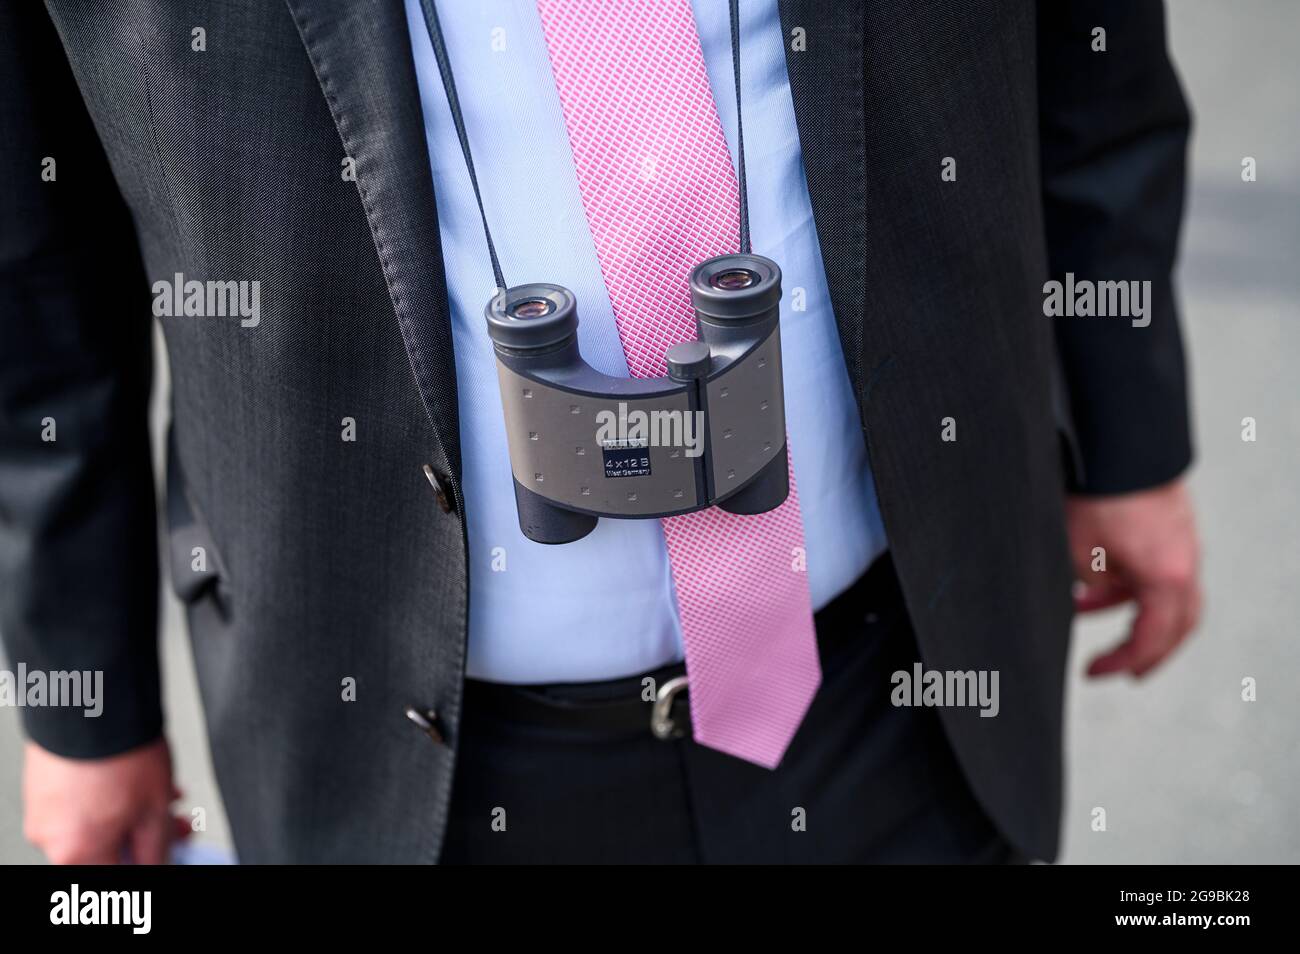 Bayreuth, Germany. 25th July, 2021. Opening of the Richard Wagner Festival 2021 with a new production of the opera 'The Flying Dutchman'. An opera guest wears binoculars around his neck in front of the Festspielhaus on the Grüner Hügel. Credit: Daniel Vogl/dpa/Alamy Live News Stock Photo